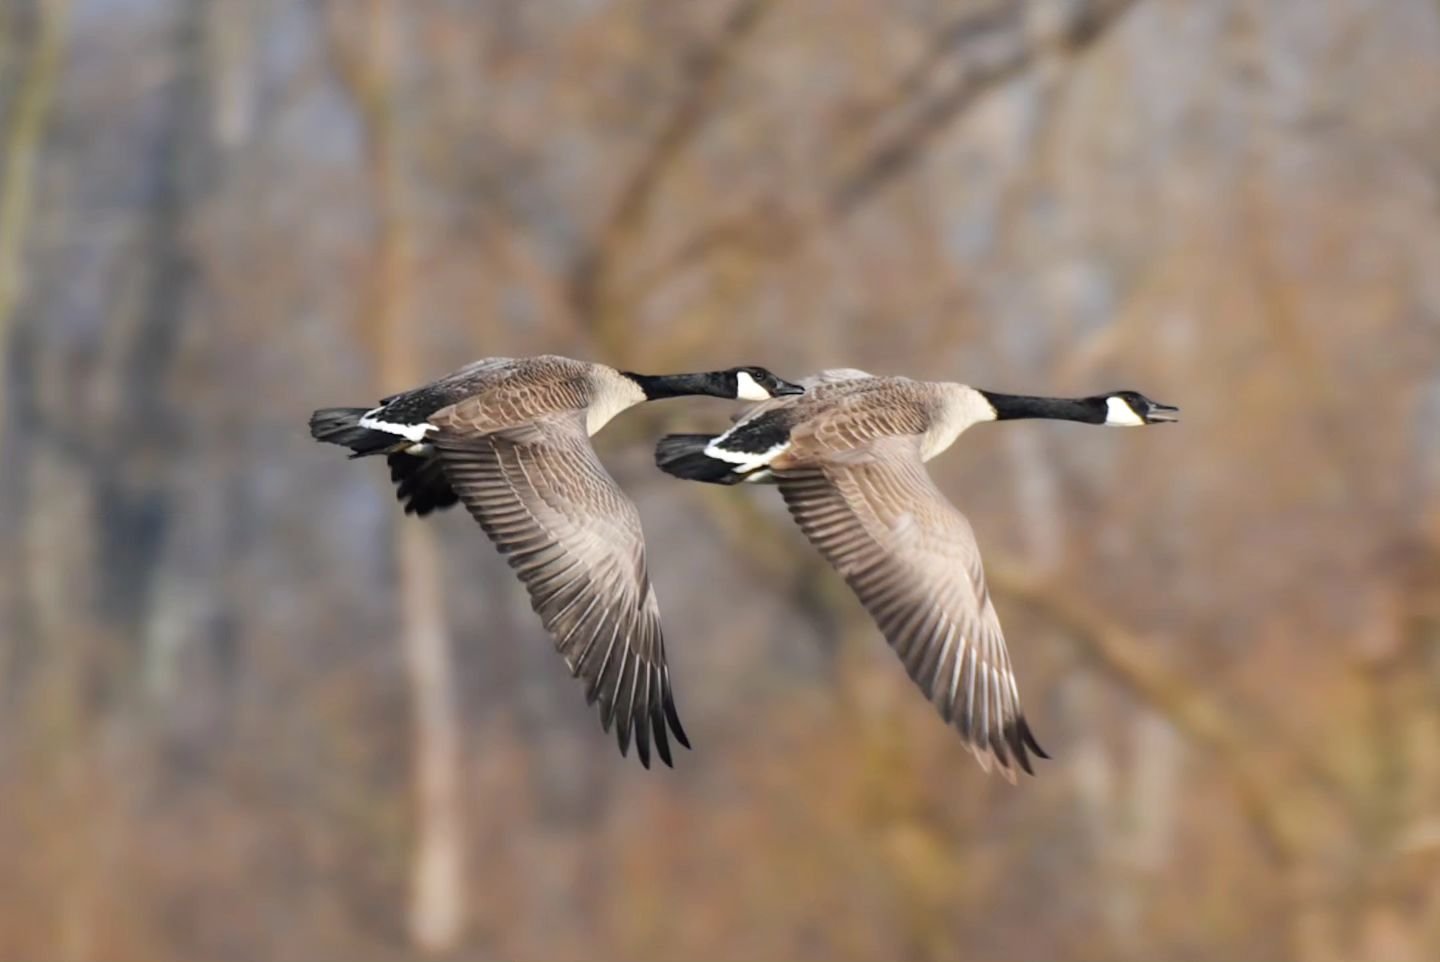 I didn't know if this is intentional, but very often when I see geese flying their wing flaps are in sync